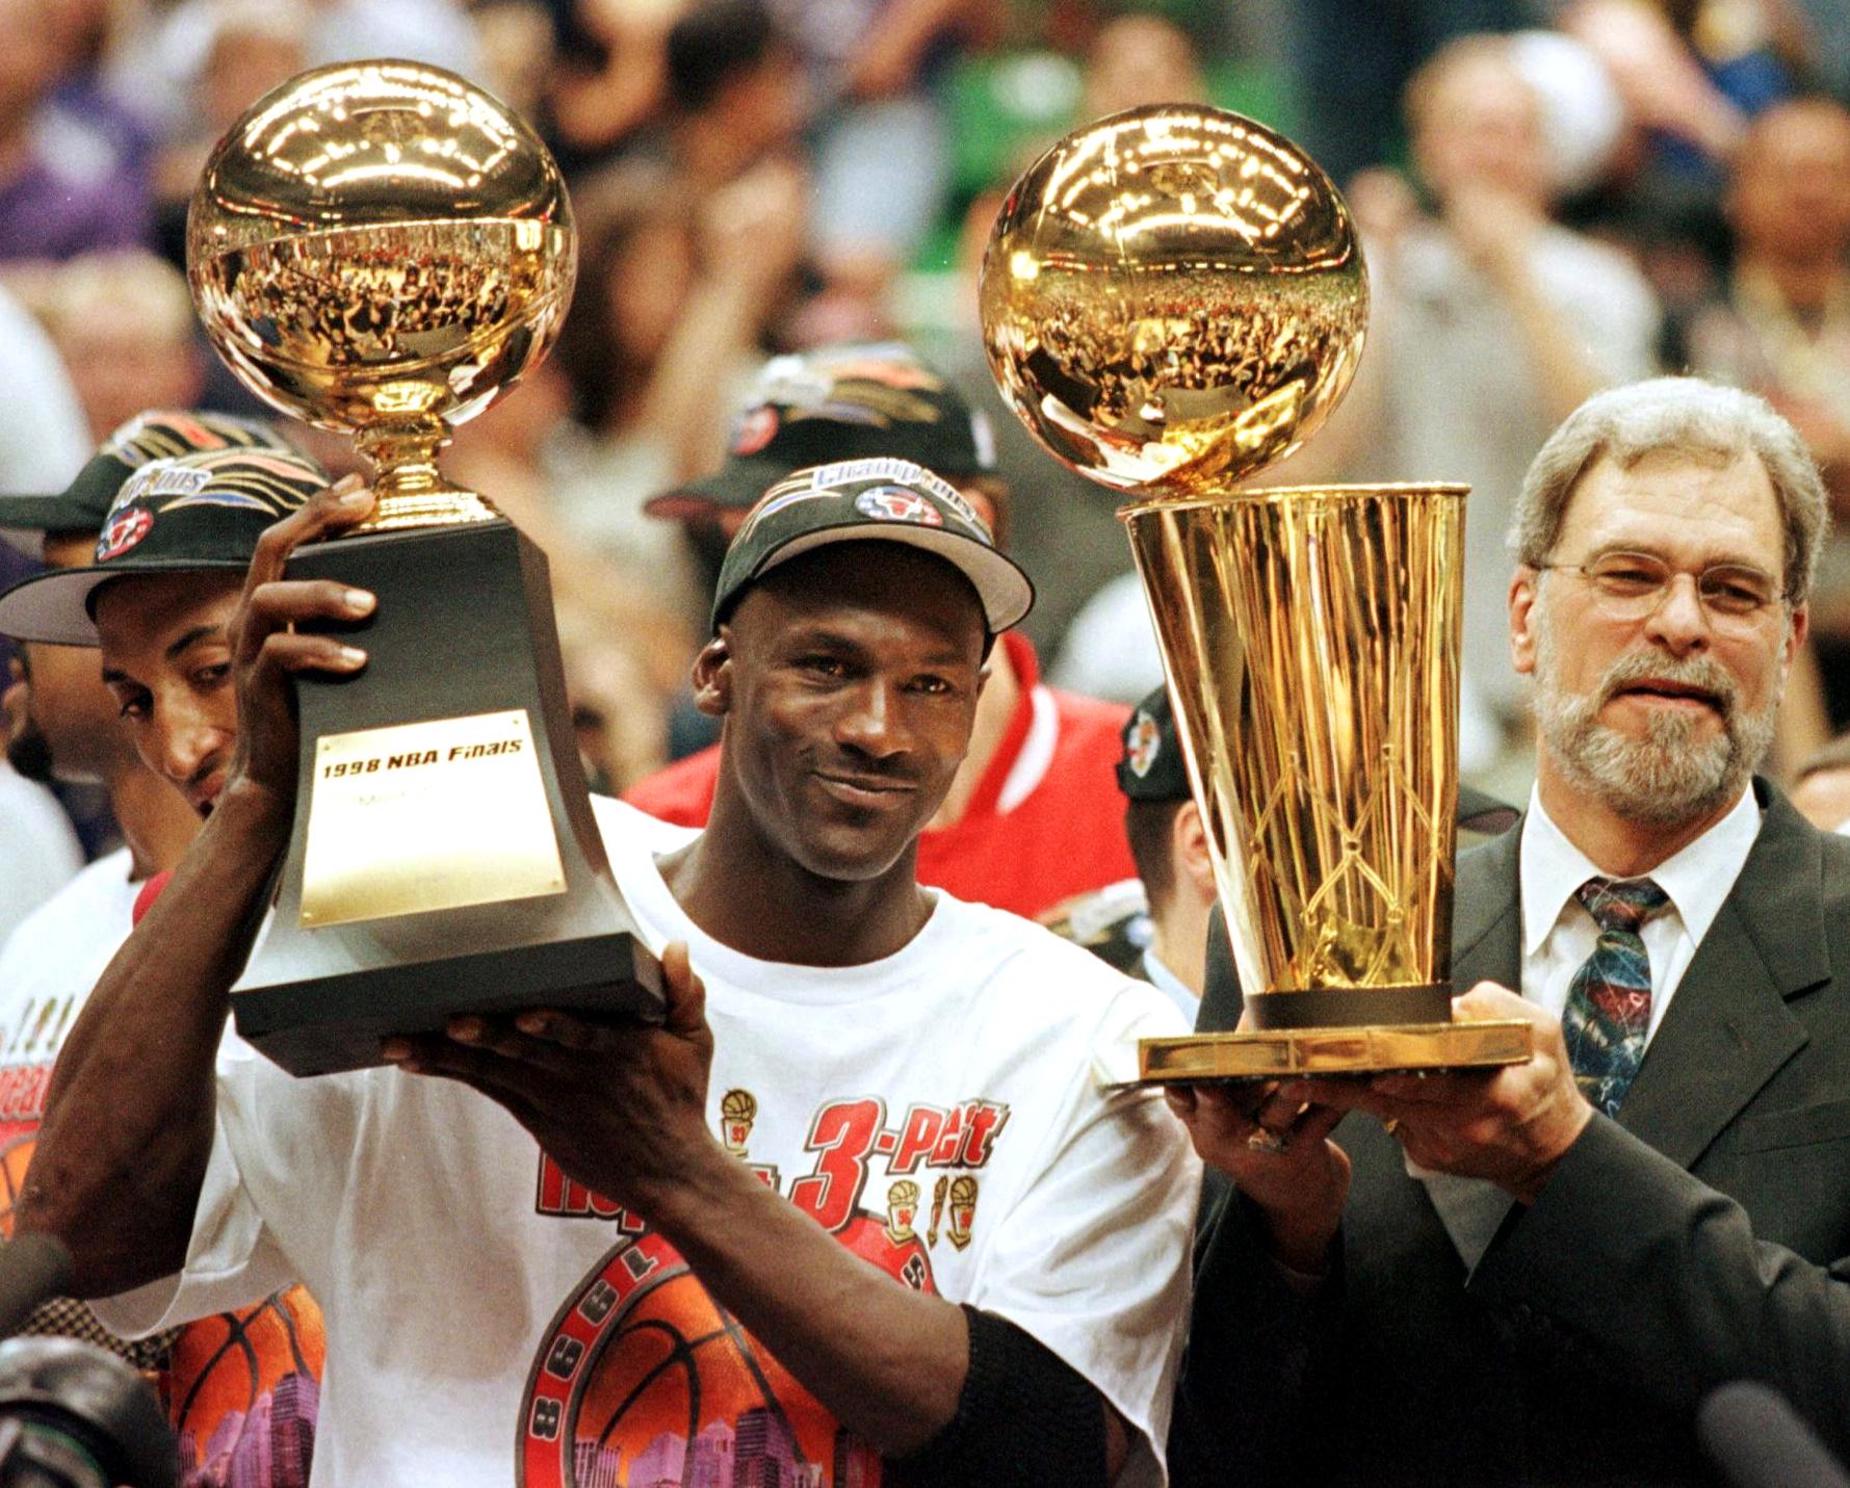 Michael Jordan and Phil Jackson found great success together as members of the Chicago Bulls organization.